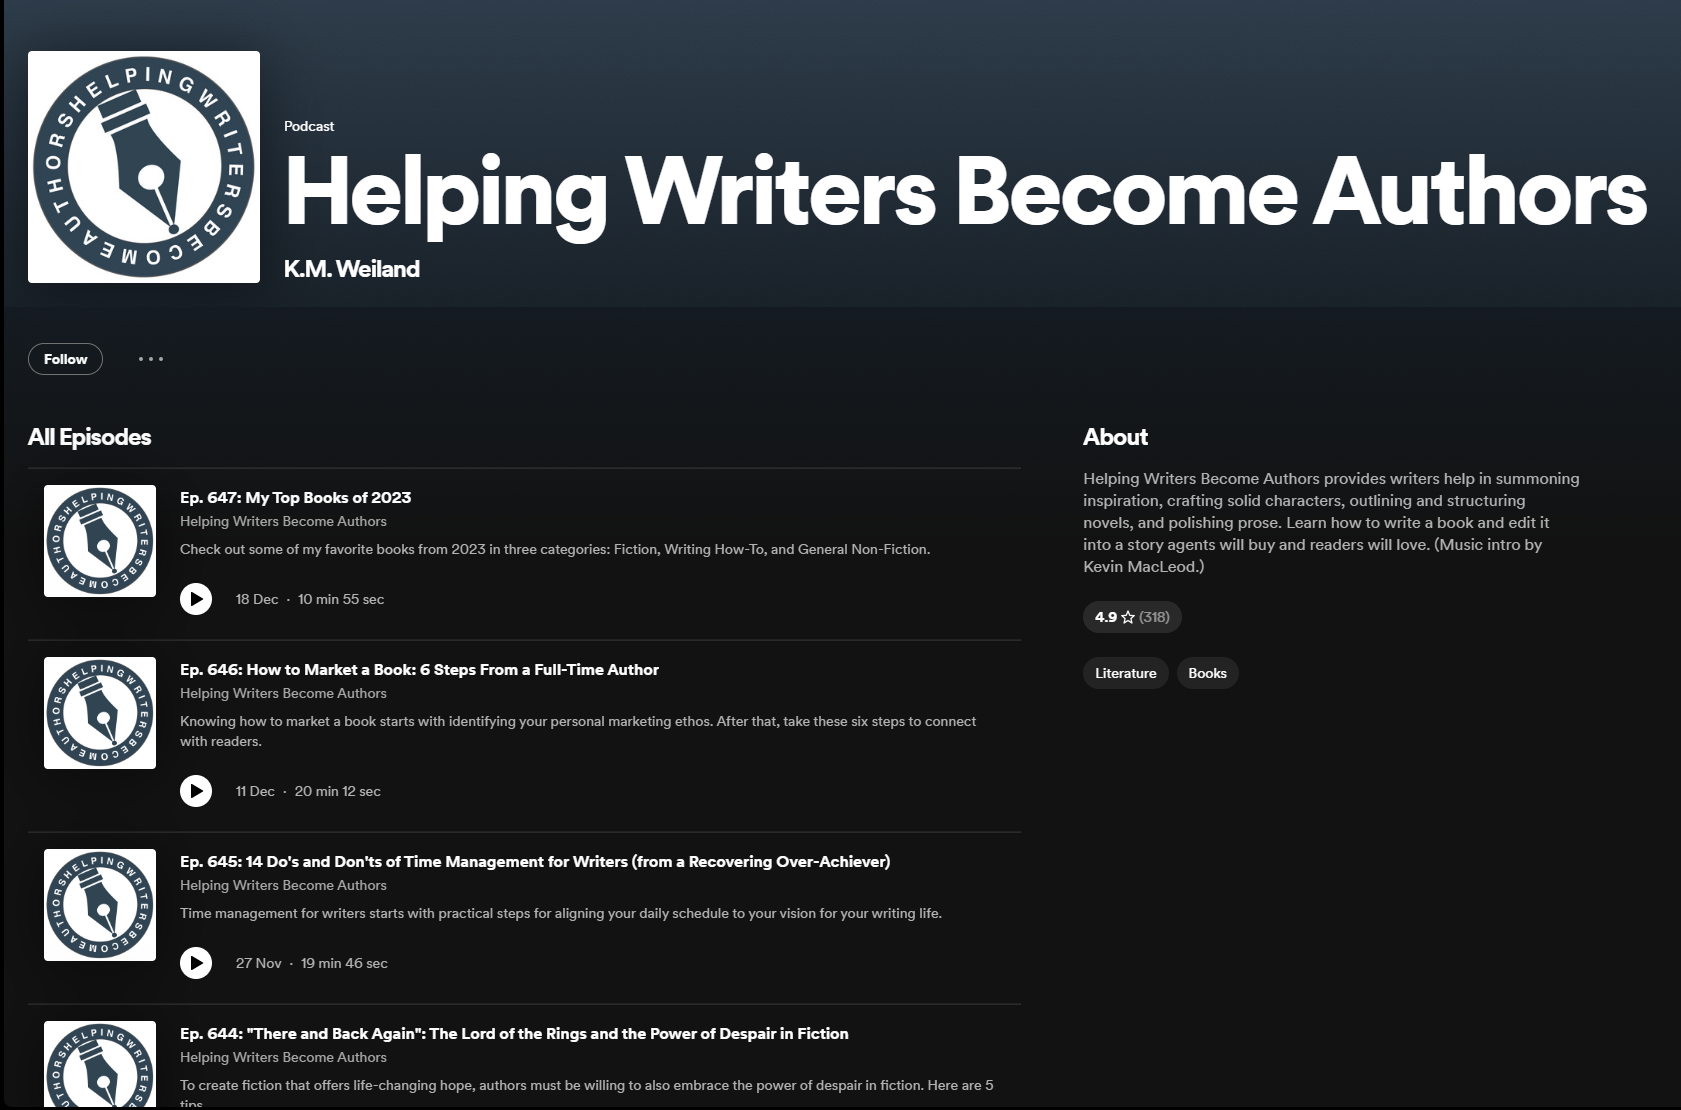 Helping Writers Become Authors podcast